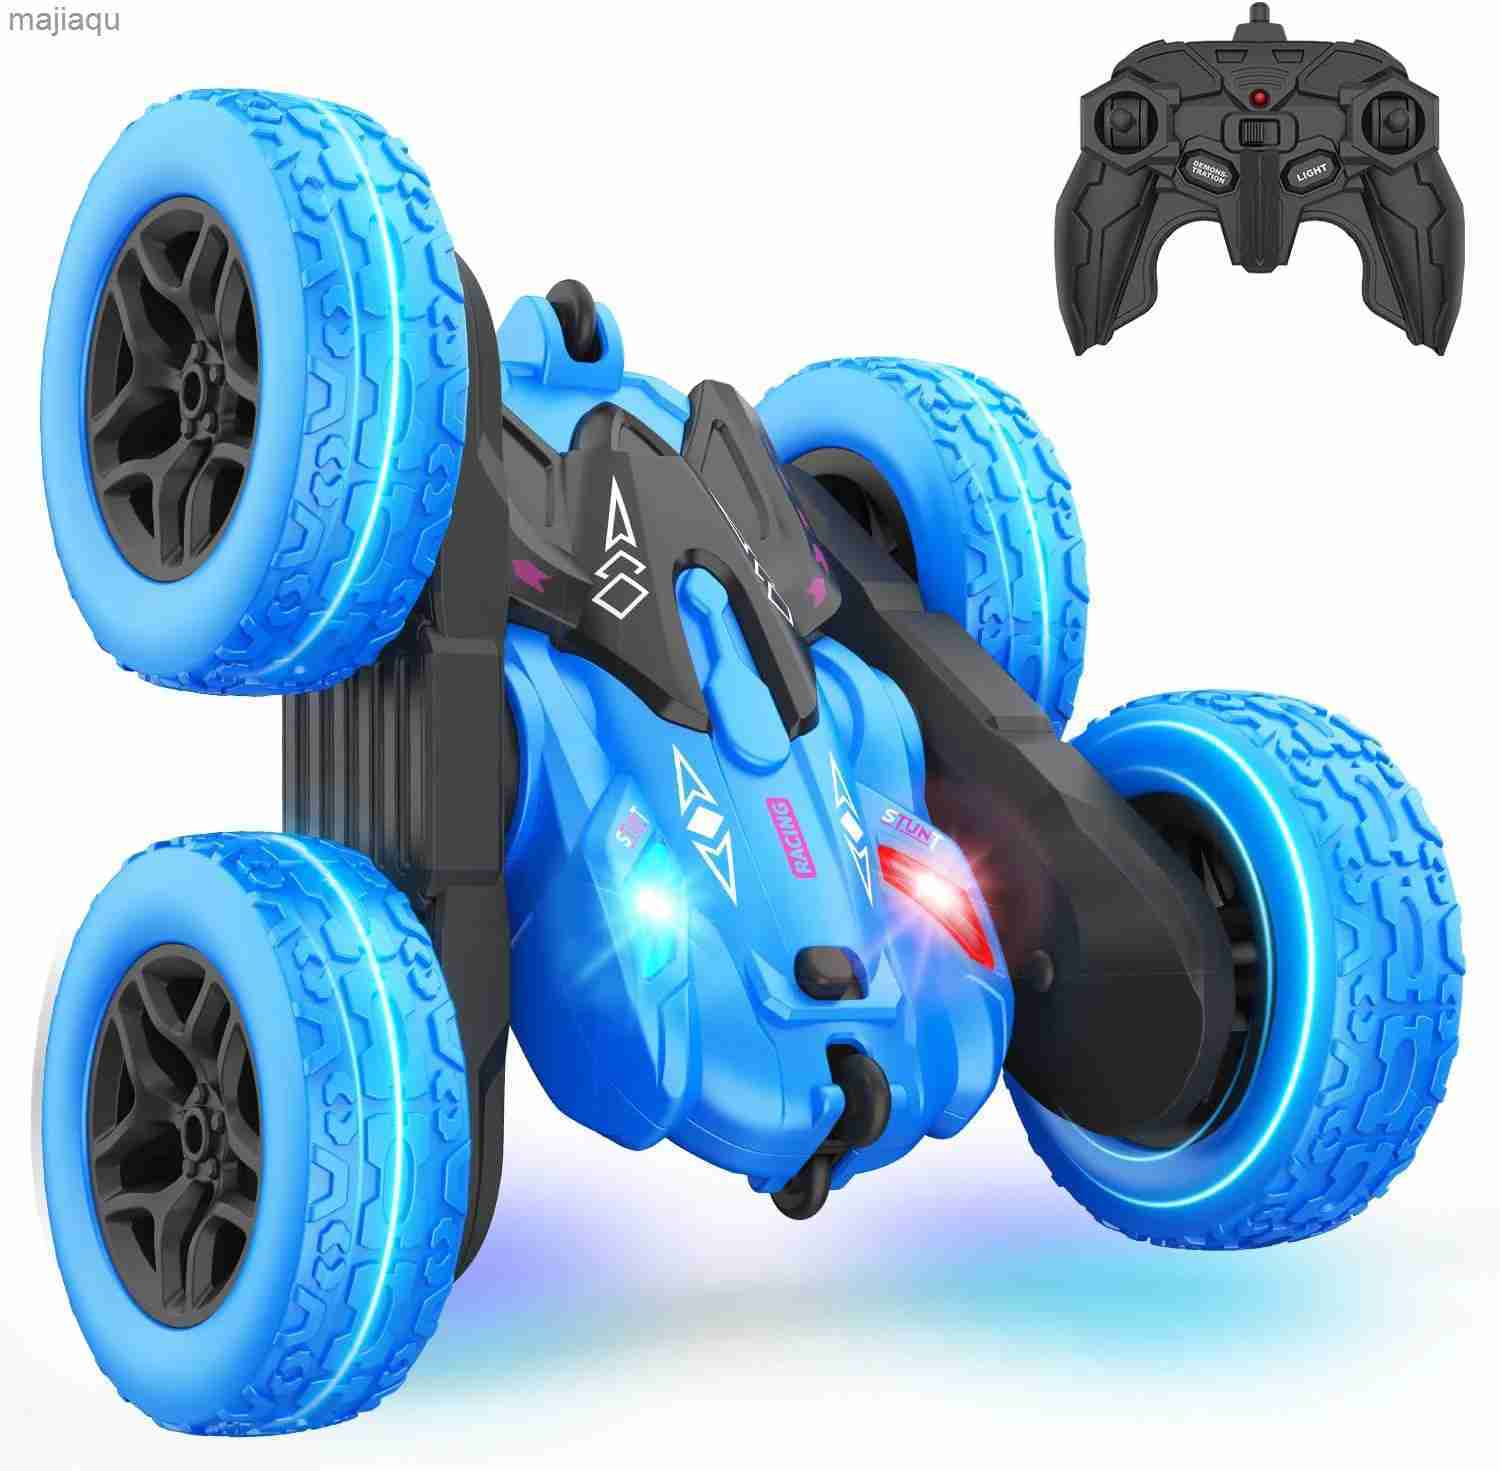 Electric/RC Car Remote control car 2.4Ghz 360 rotating stunt RC car toy with LED lights rechargeable drift car suitable for boys and girls as giftsL2404